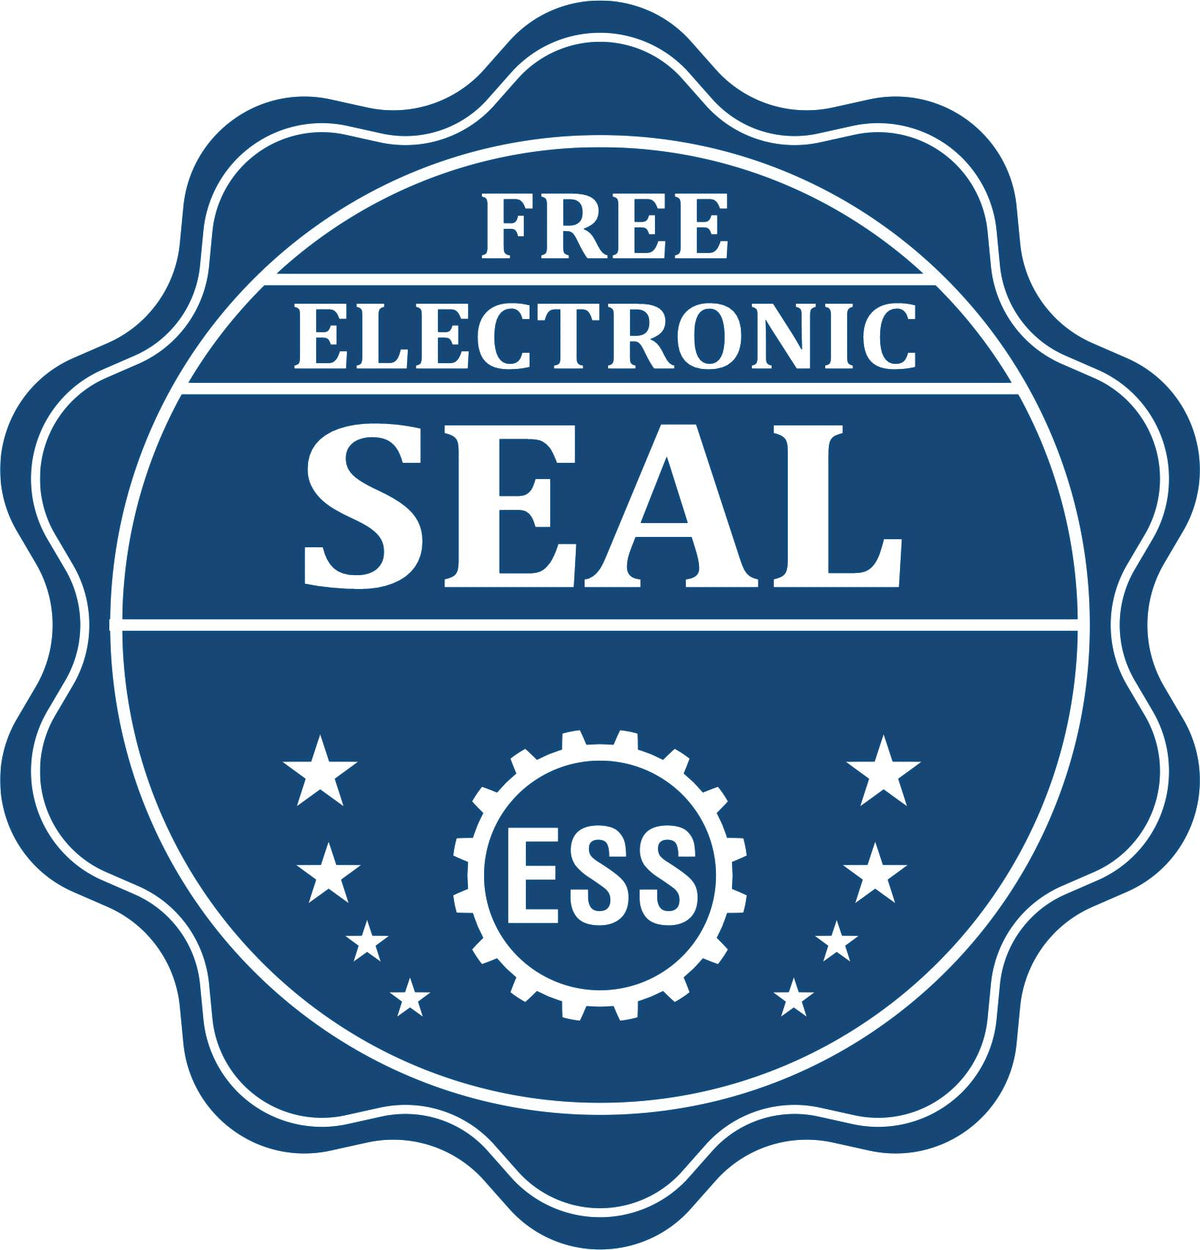 A badge showing a free electronic seal for the Slim Pre-Inked Rhode Island Professional Engineer Seal Stamp with stars and the ESS gear on the emblem.